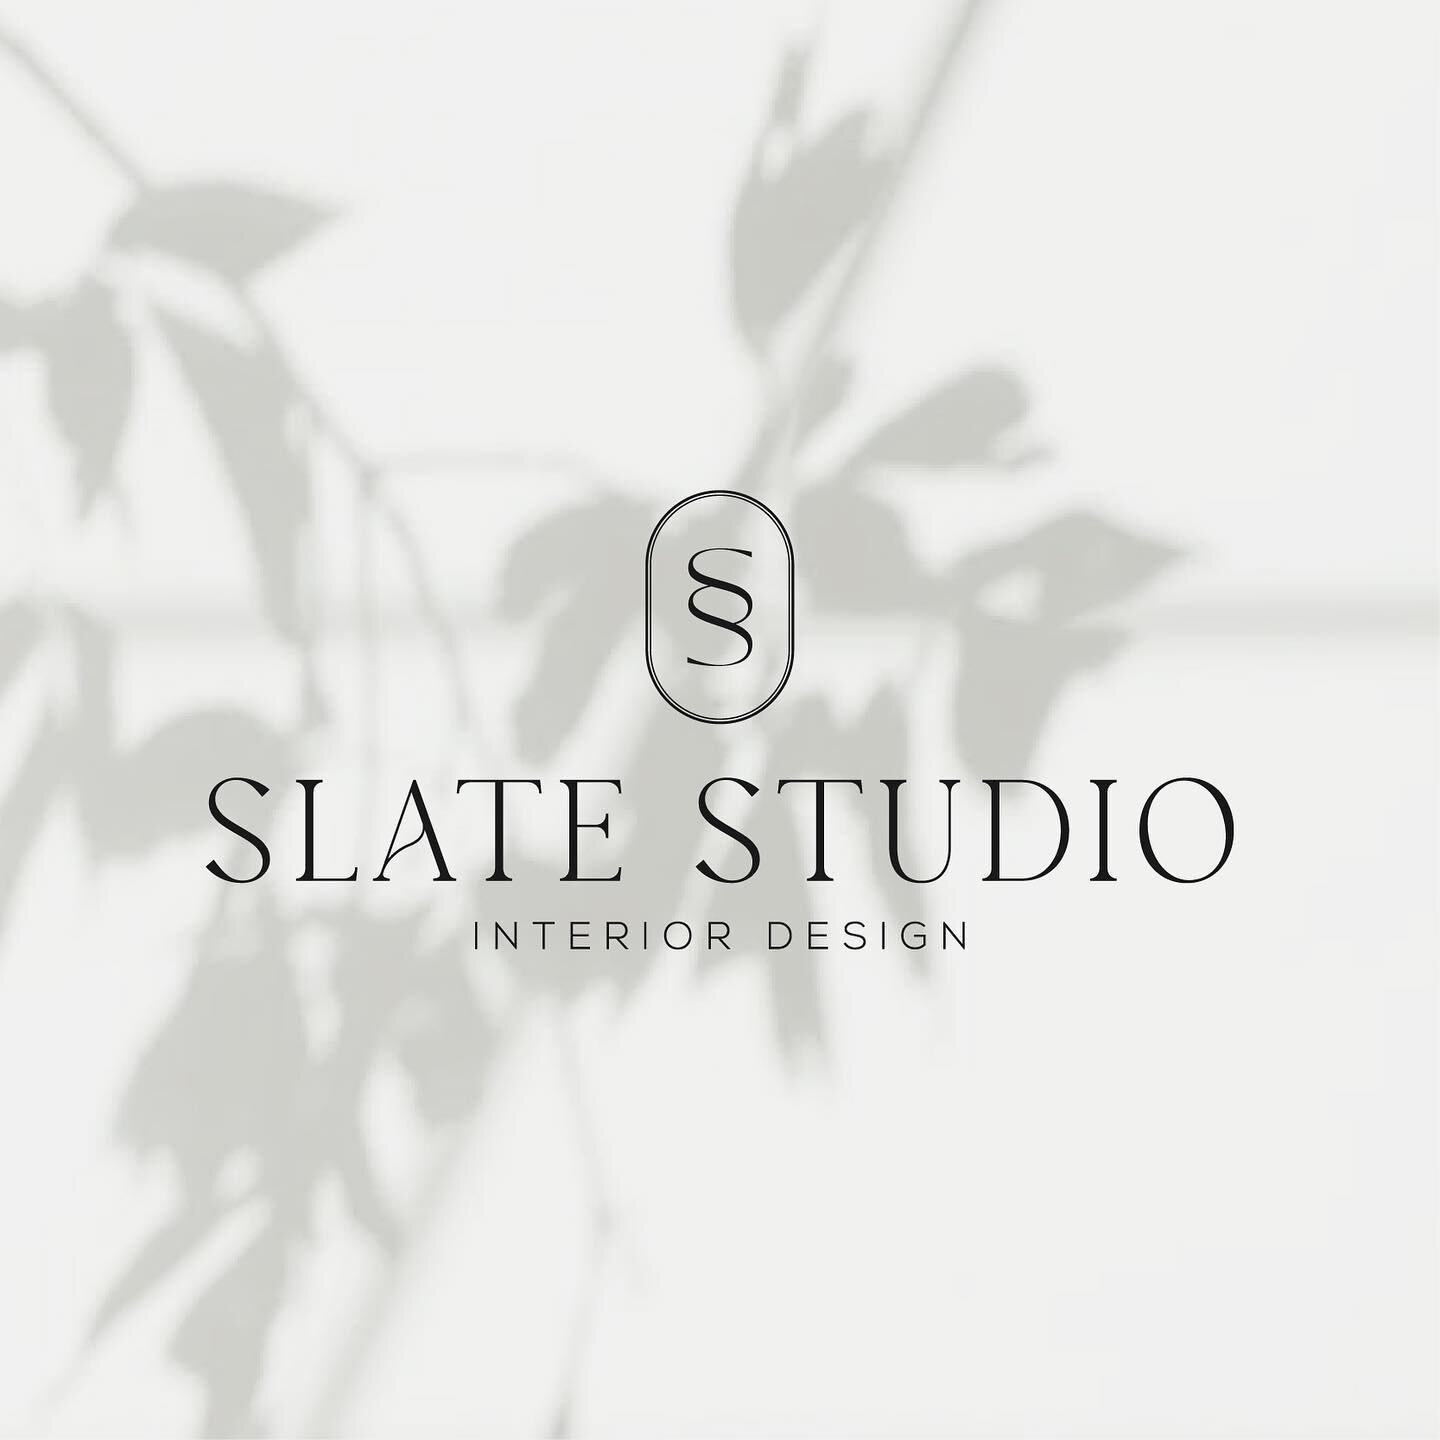 Very excited to share the new branding for Slate Studio! The website got a fresh look too, so head to slatechicago.com to check it out 💃

#newlook #smallbusiness #newbranding #newwebsite #websitedesign #interiordesign #interiors #interiordecor #logo